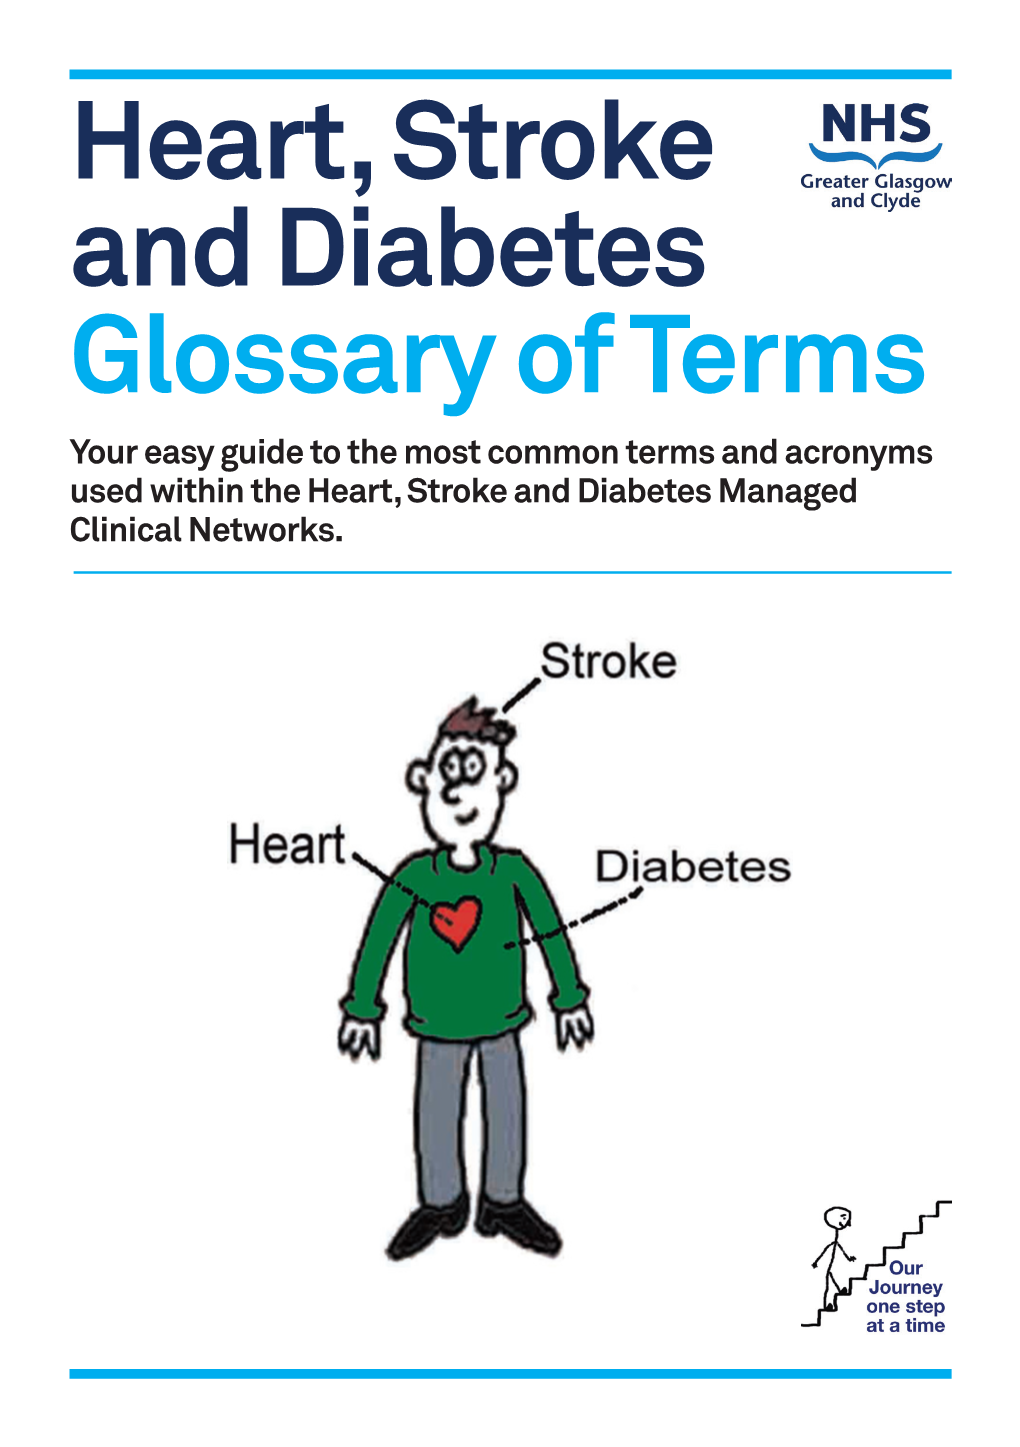 Heart, Stroke and Diabetes Glossary of Terms